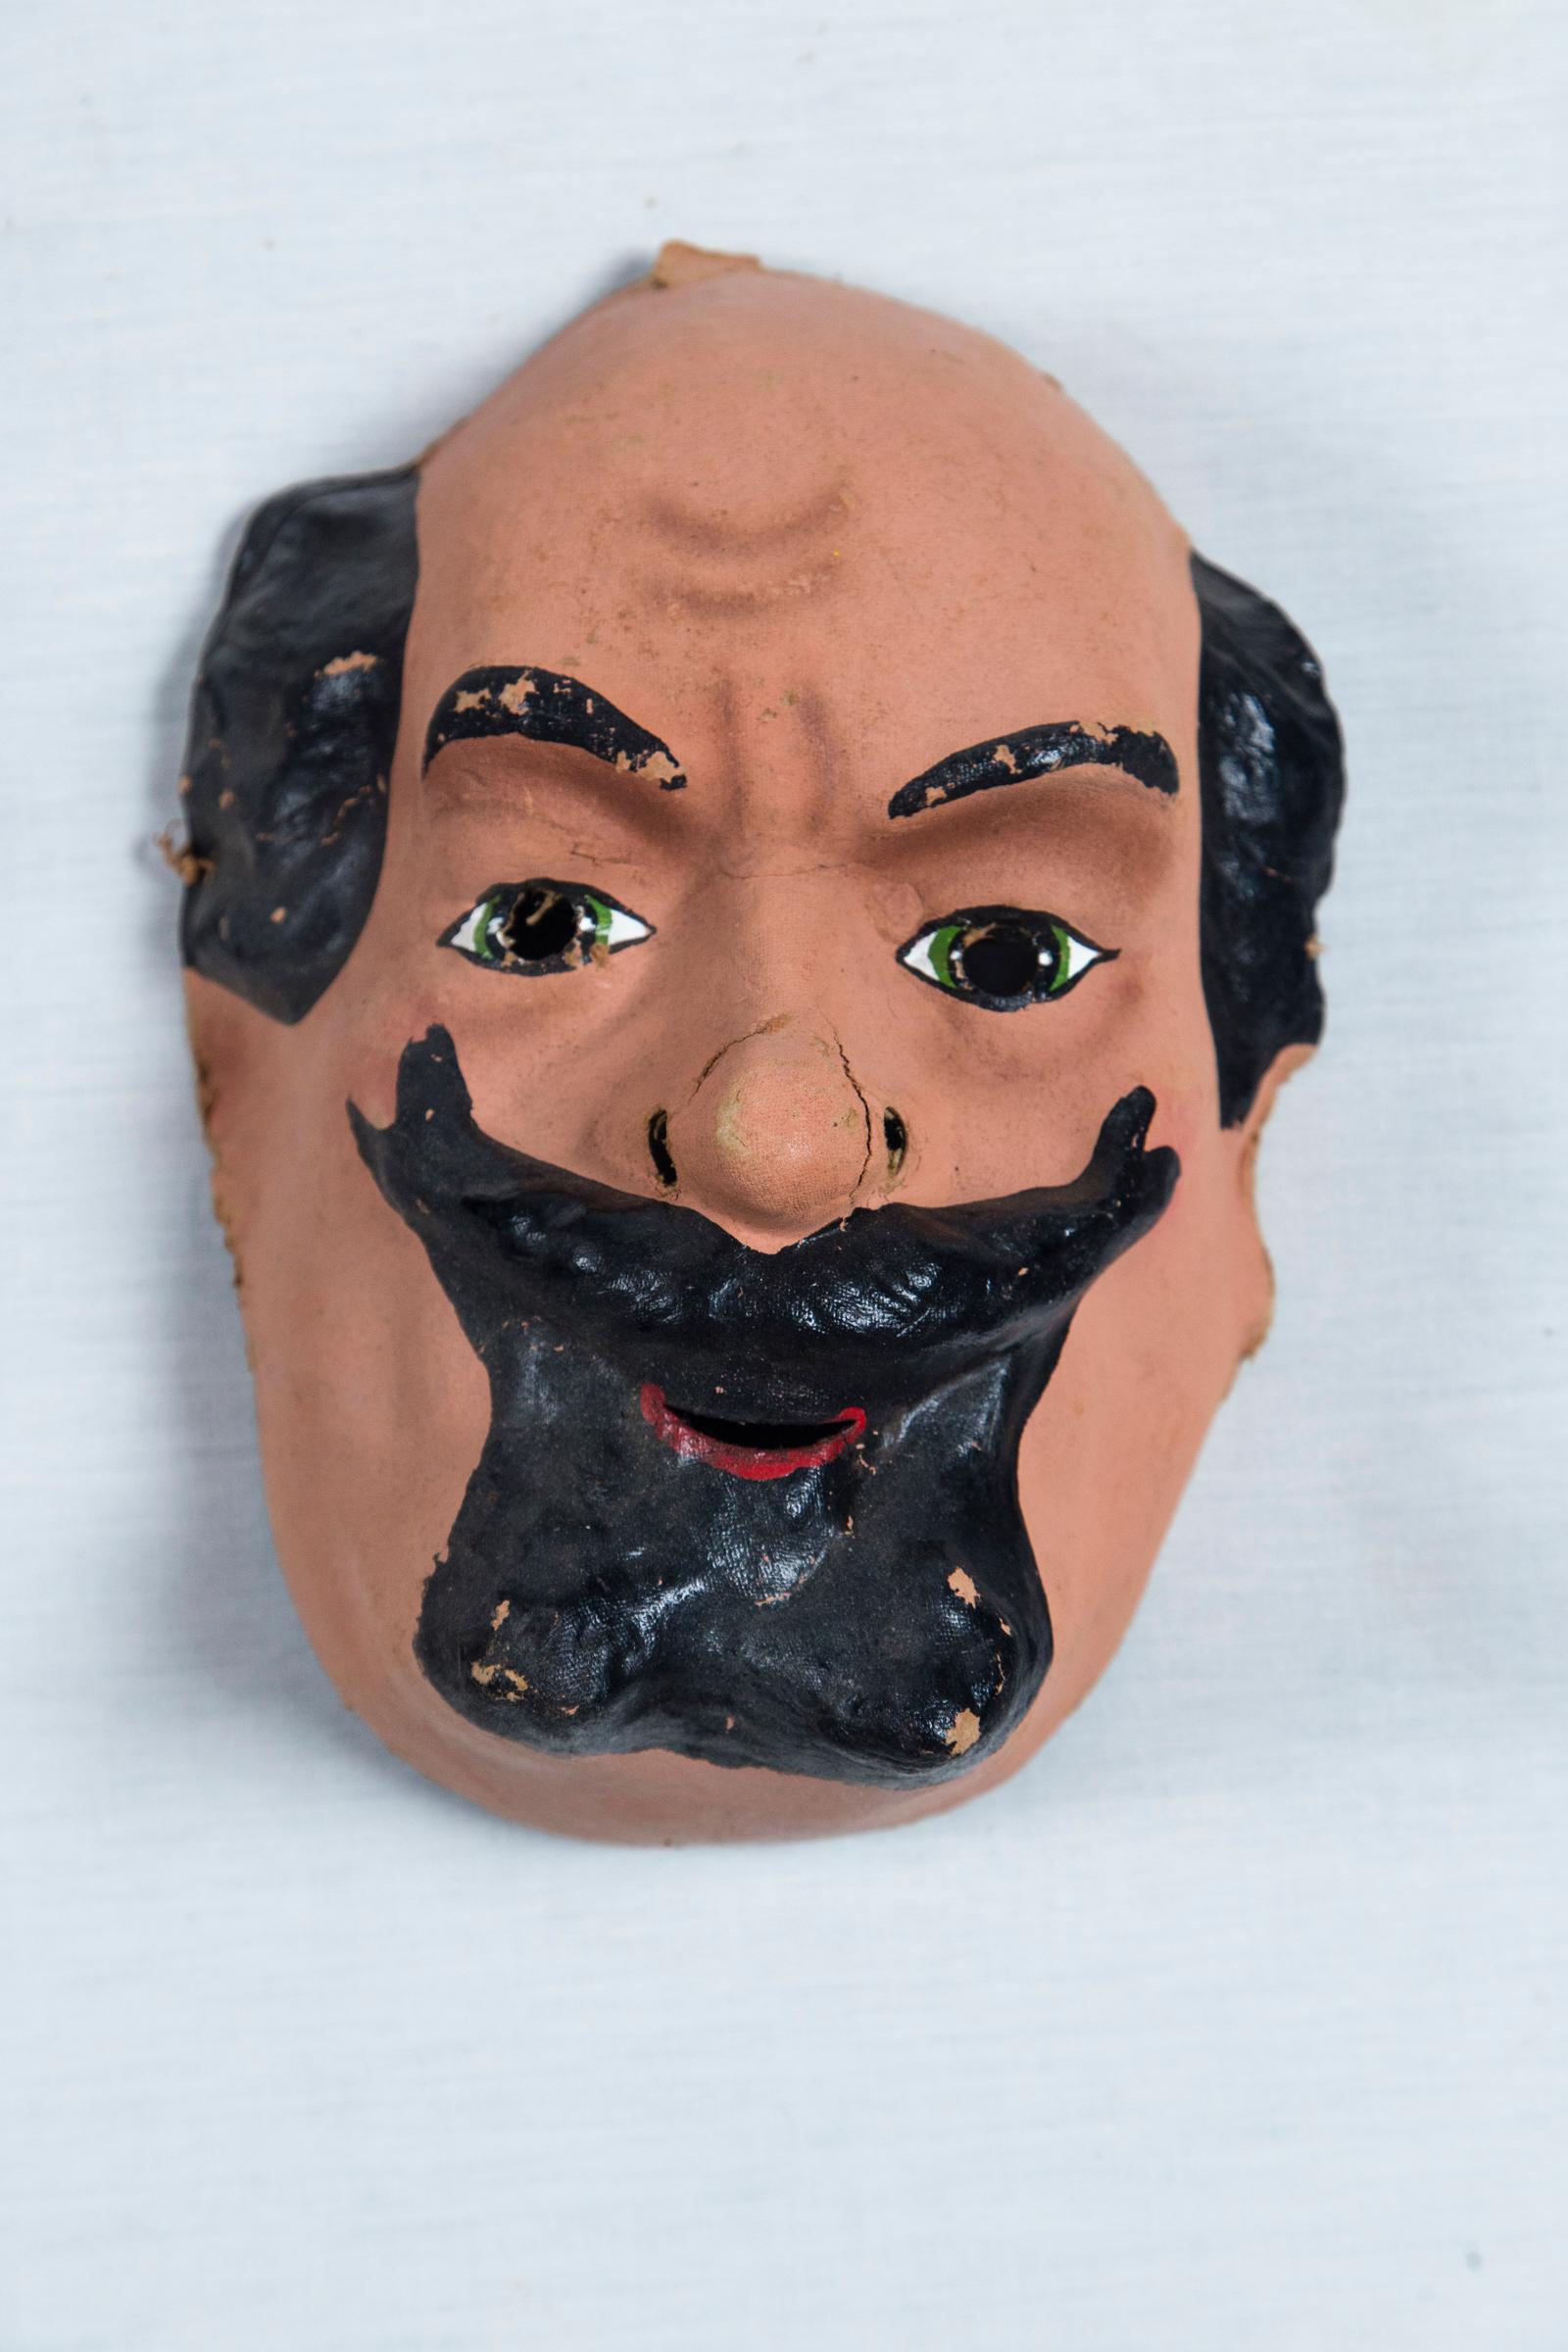 Very animated face masks from the 1940s. Three dimensional.